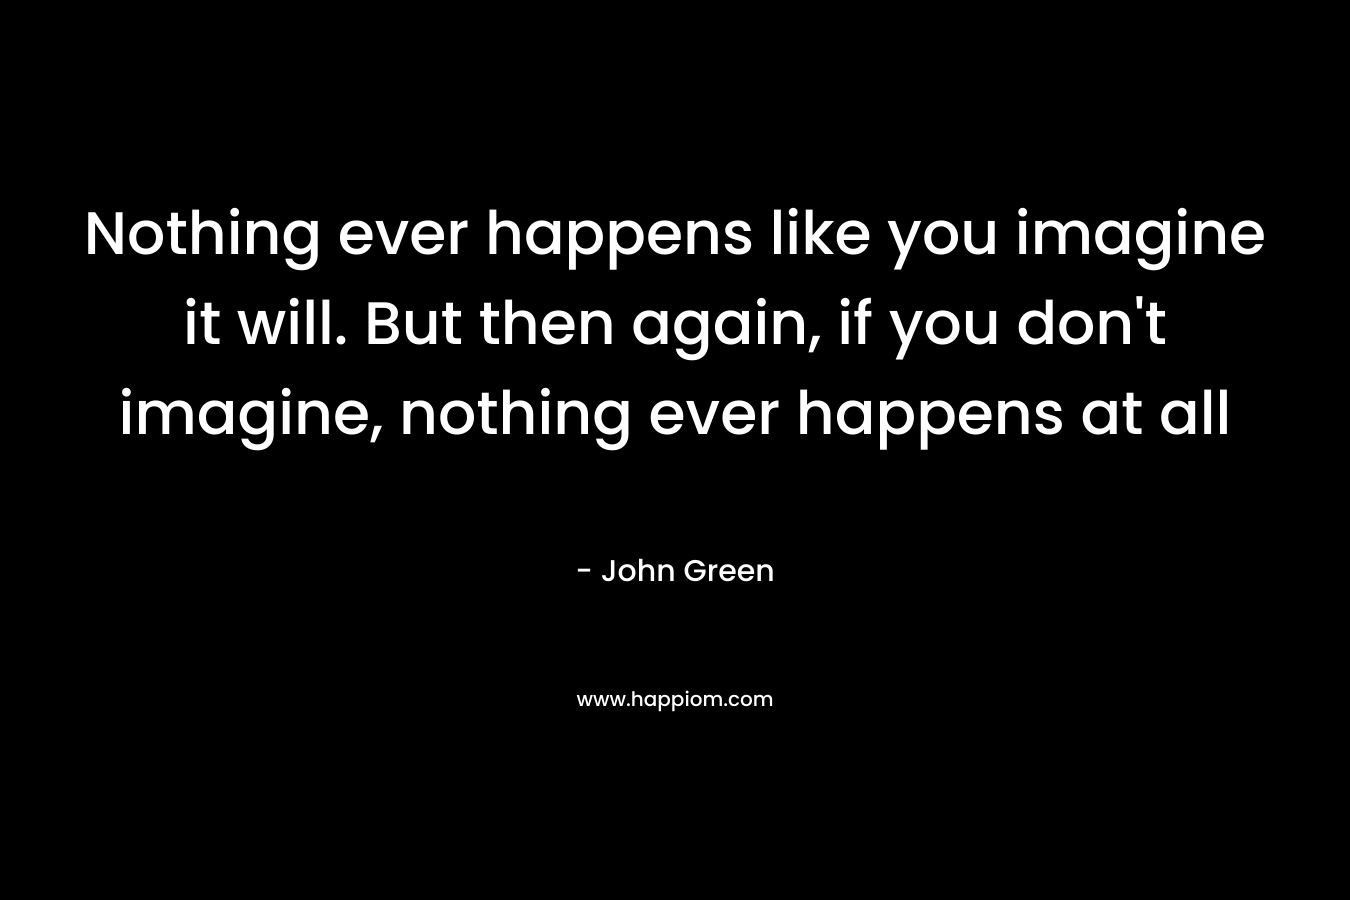 Nothing ever happens like you imagine it will. But then again, if you don't imagine, nothing ever happens at all